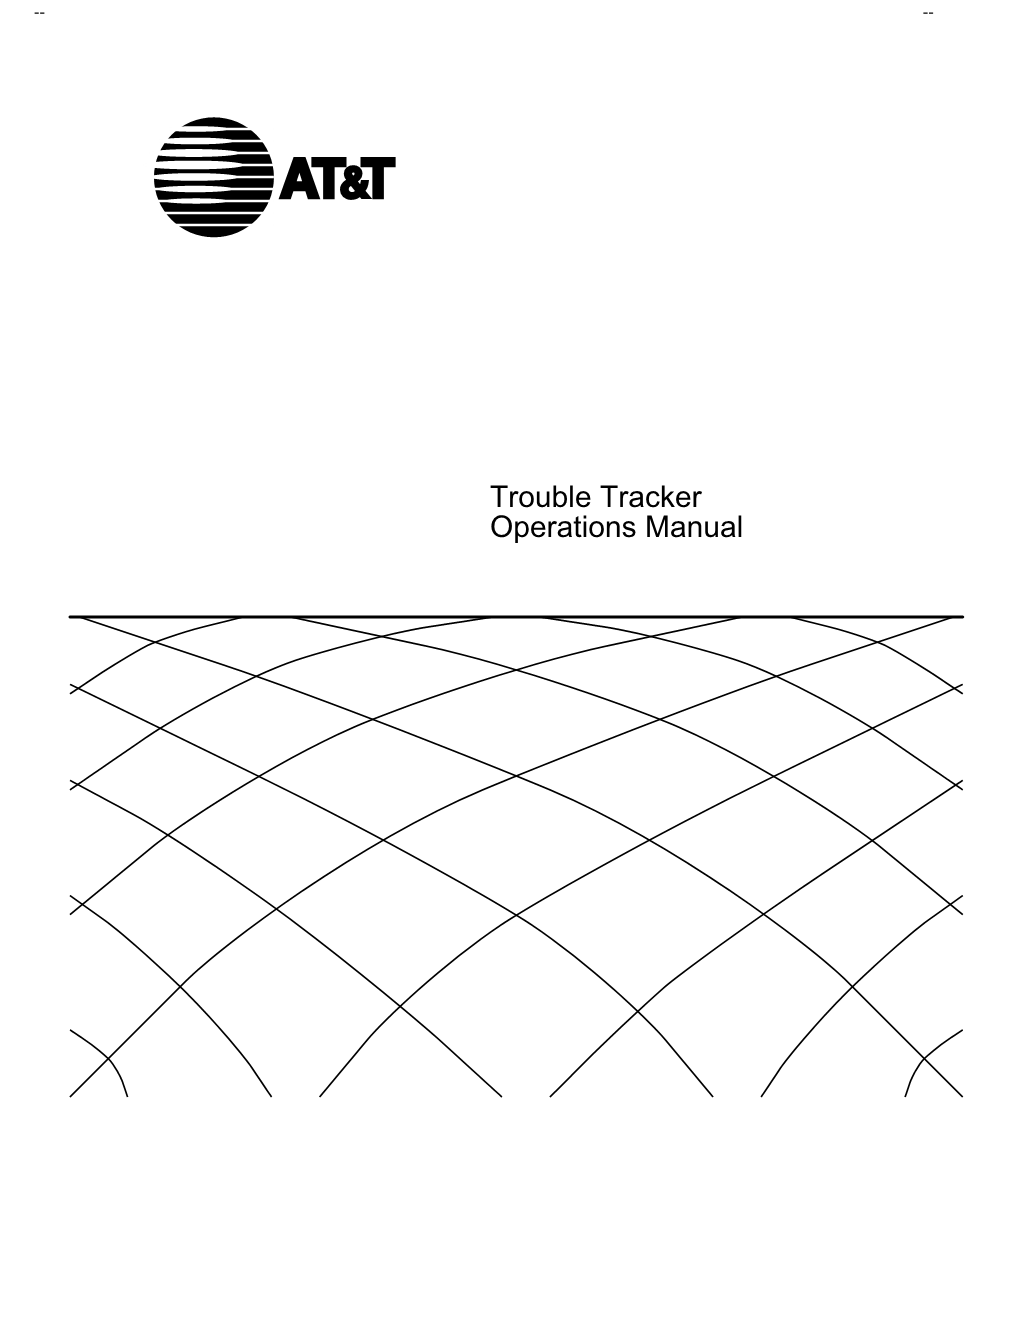 Trouble Tracker Operations Manual --